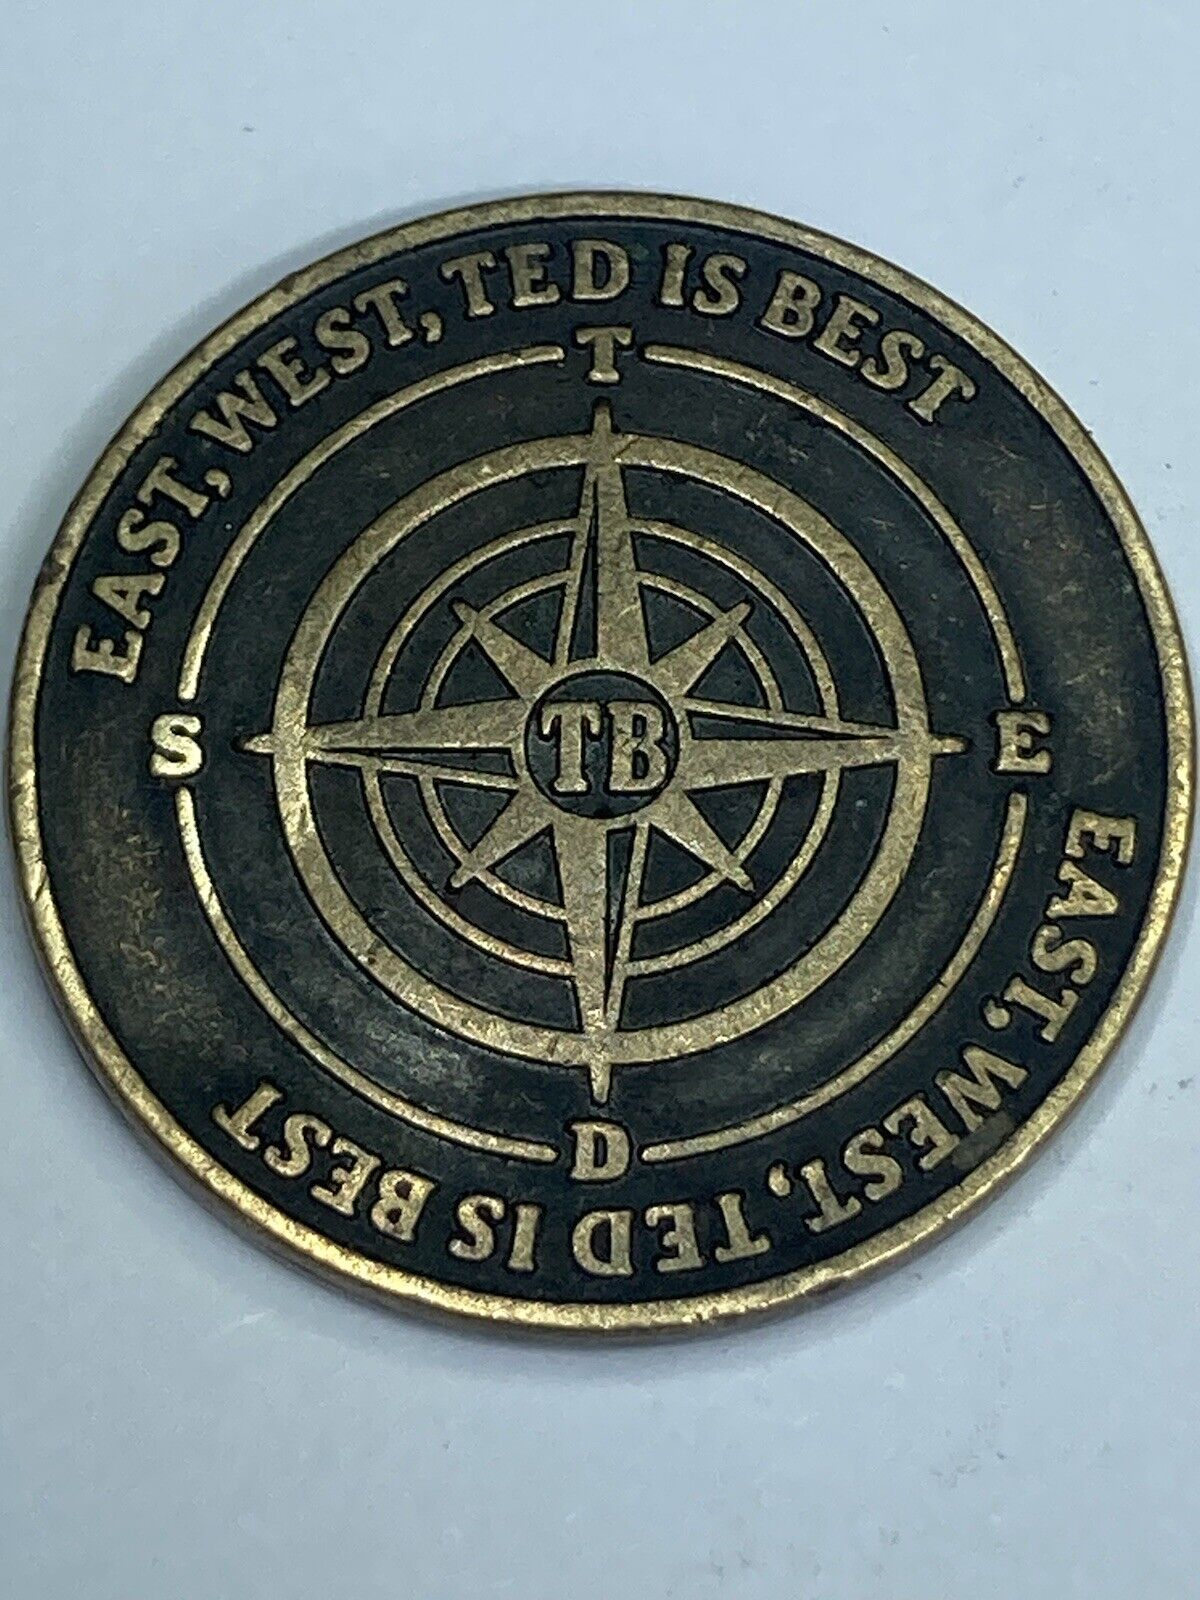 1988 token East West Ted is best Ted Baker London Clothing Company Compass coin